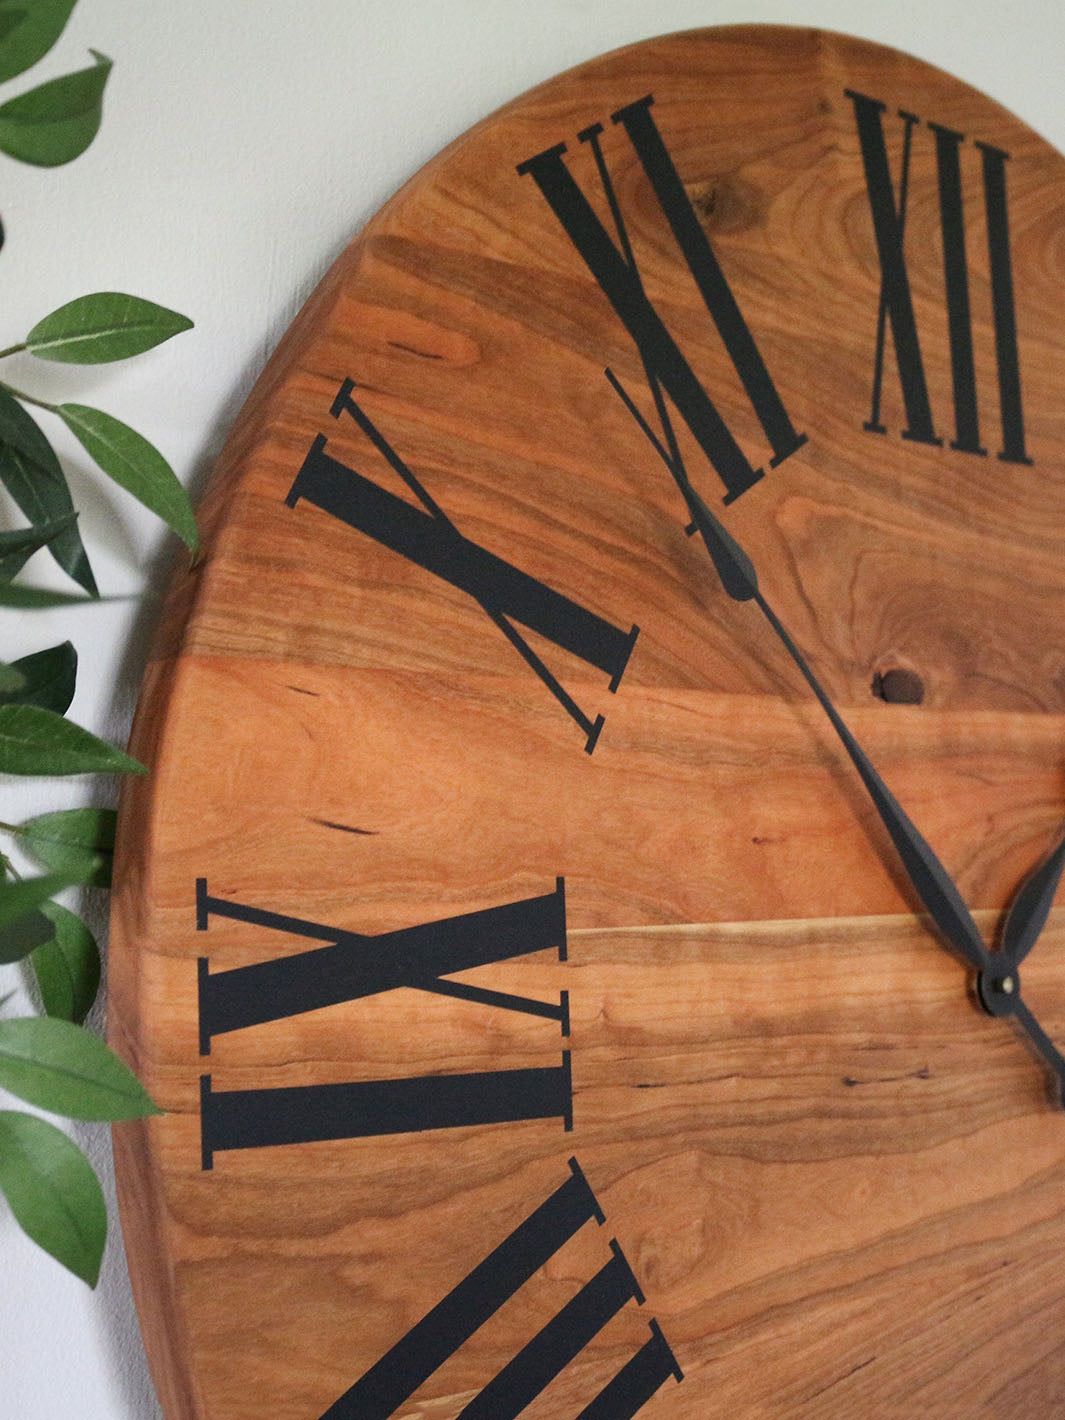 Large Solid Cherry Hardwood Wall Clock with Black Roman Numerals Earthly Comfort Clocks 552-4